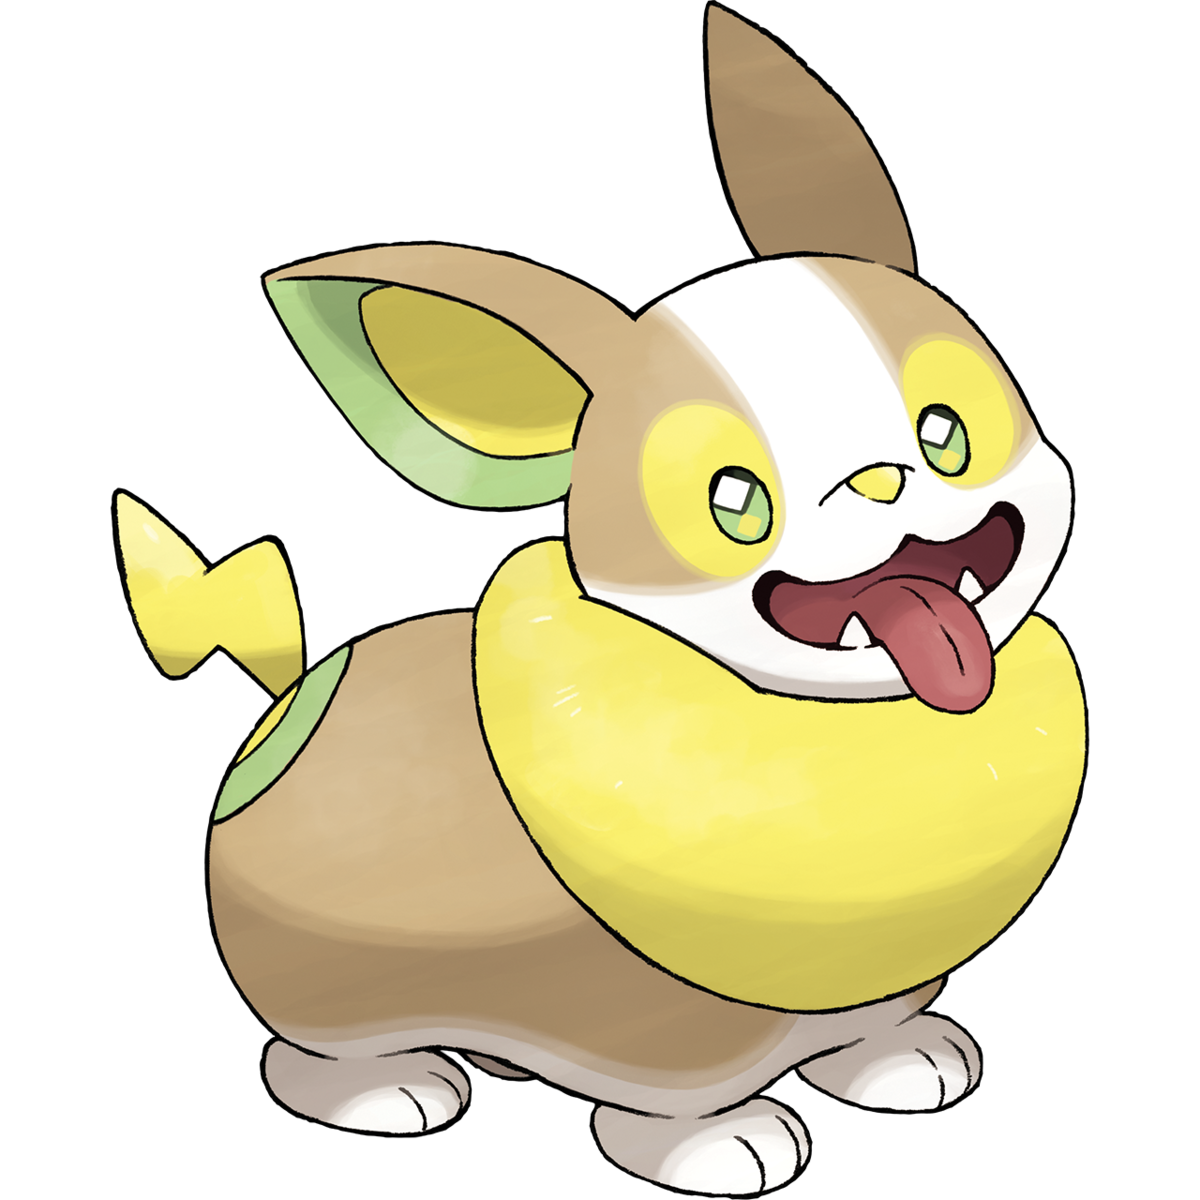 Yamper's Ball Fetch is number six on my list of the worst Pokémon abilities. Read on to see the rest of my top 10.